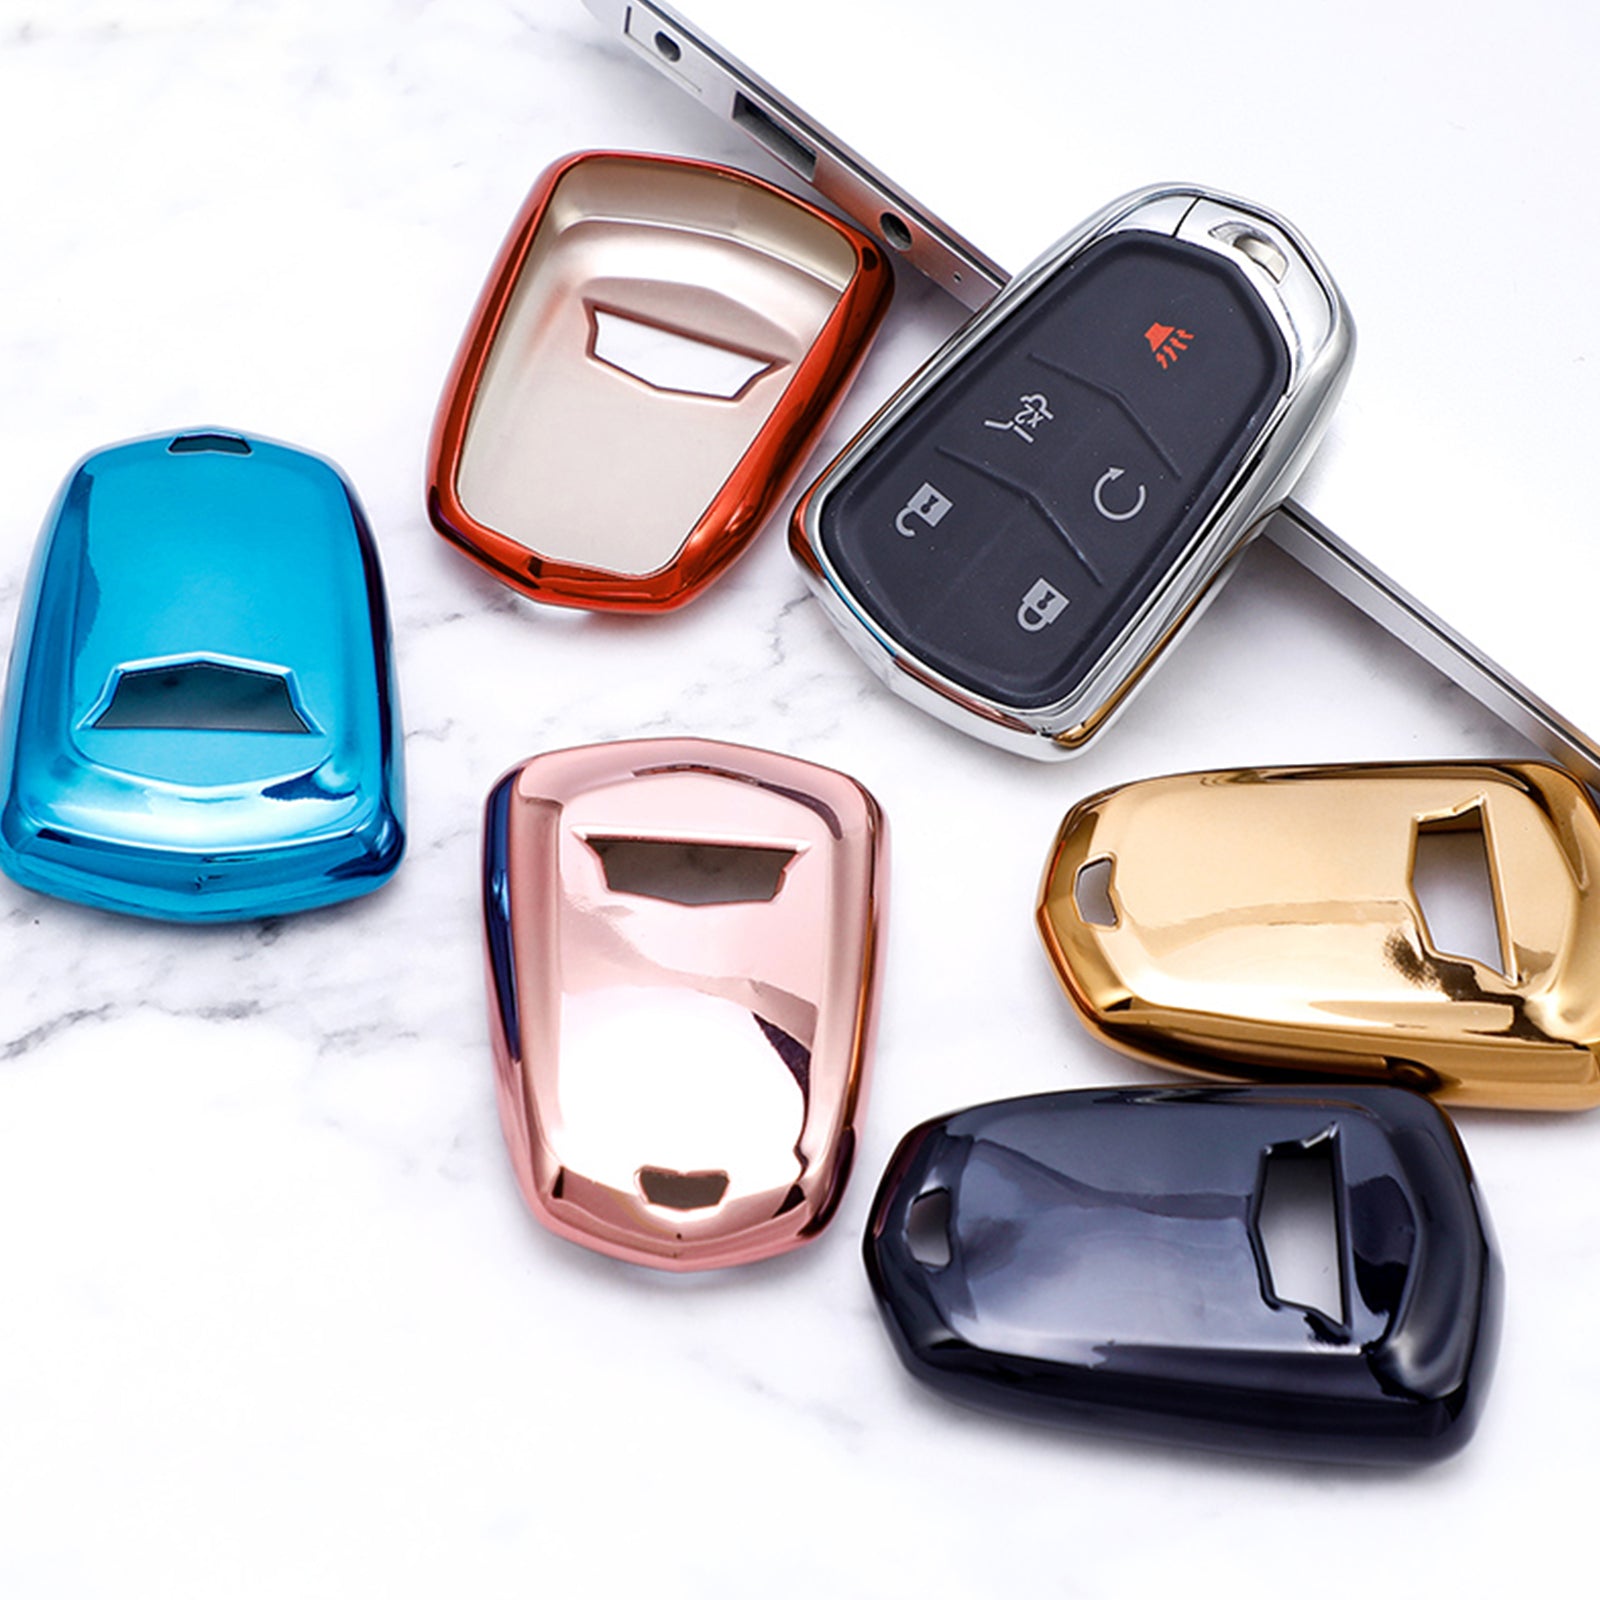 Protect Your Key Fob With This Durable Cover - Fits Escalade, Cts